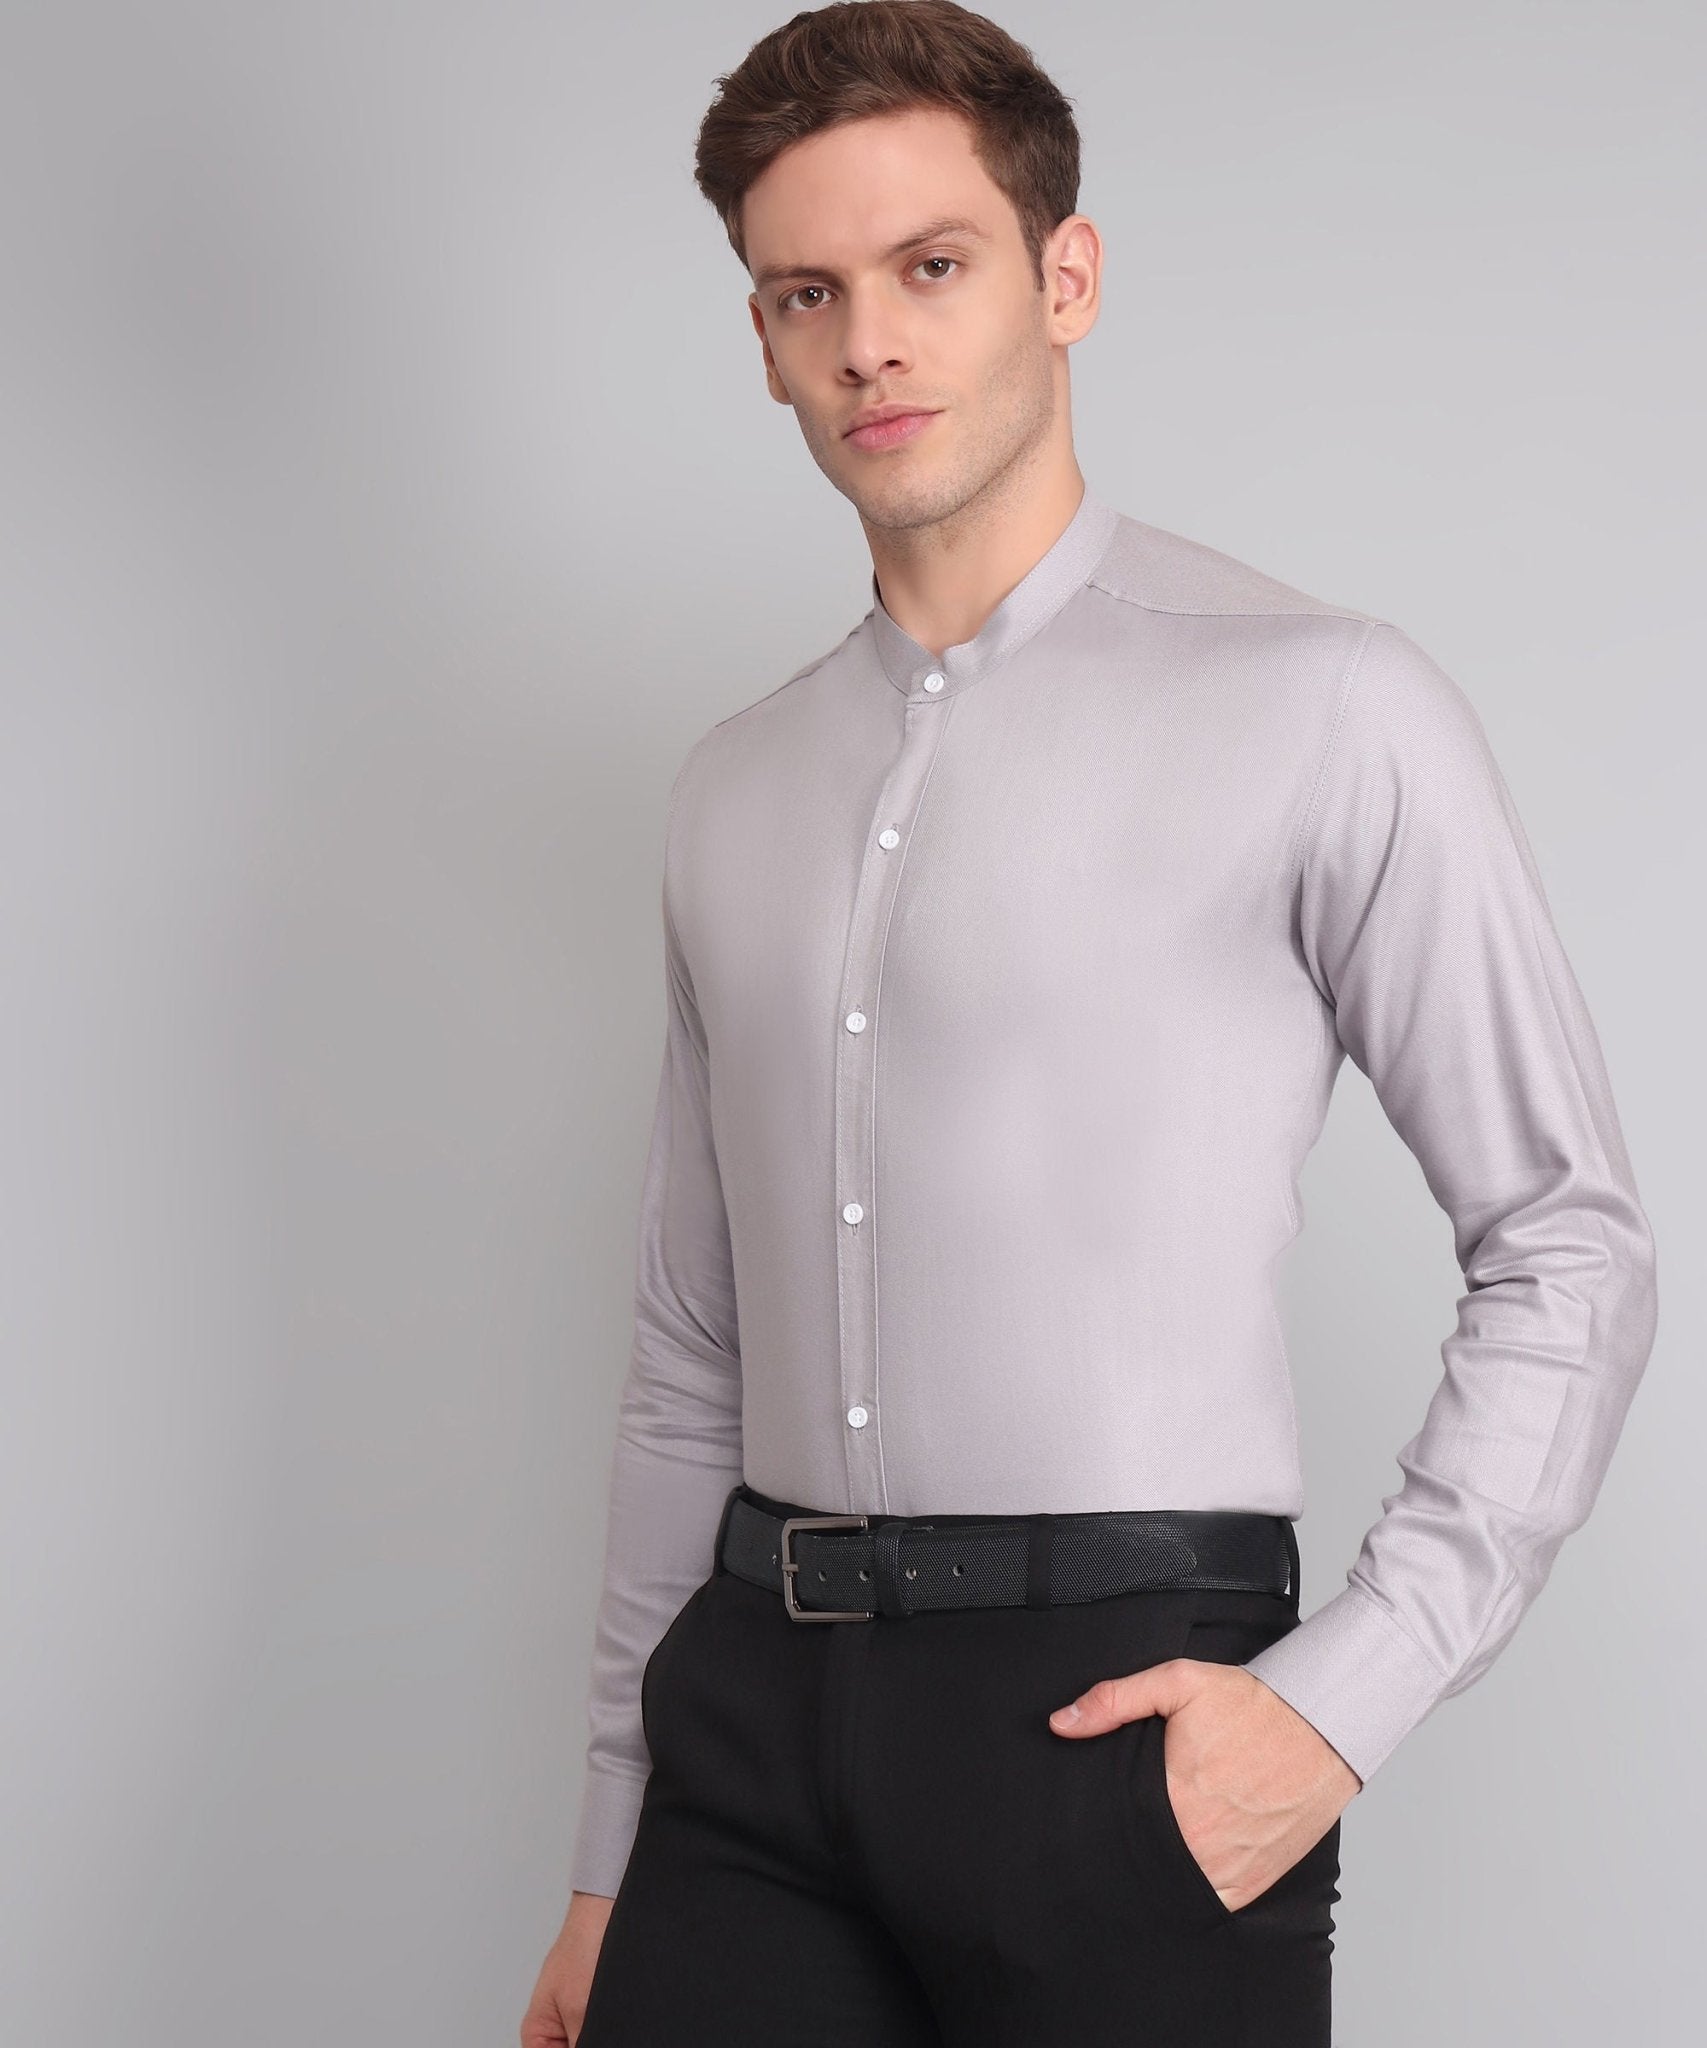 TryBuy Premium Luxurious Full Sleeves Mandarin Collar Silver Cotton Casual Shirt for Men - TryBuy® USA🇺🇸